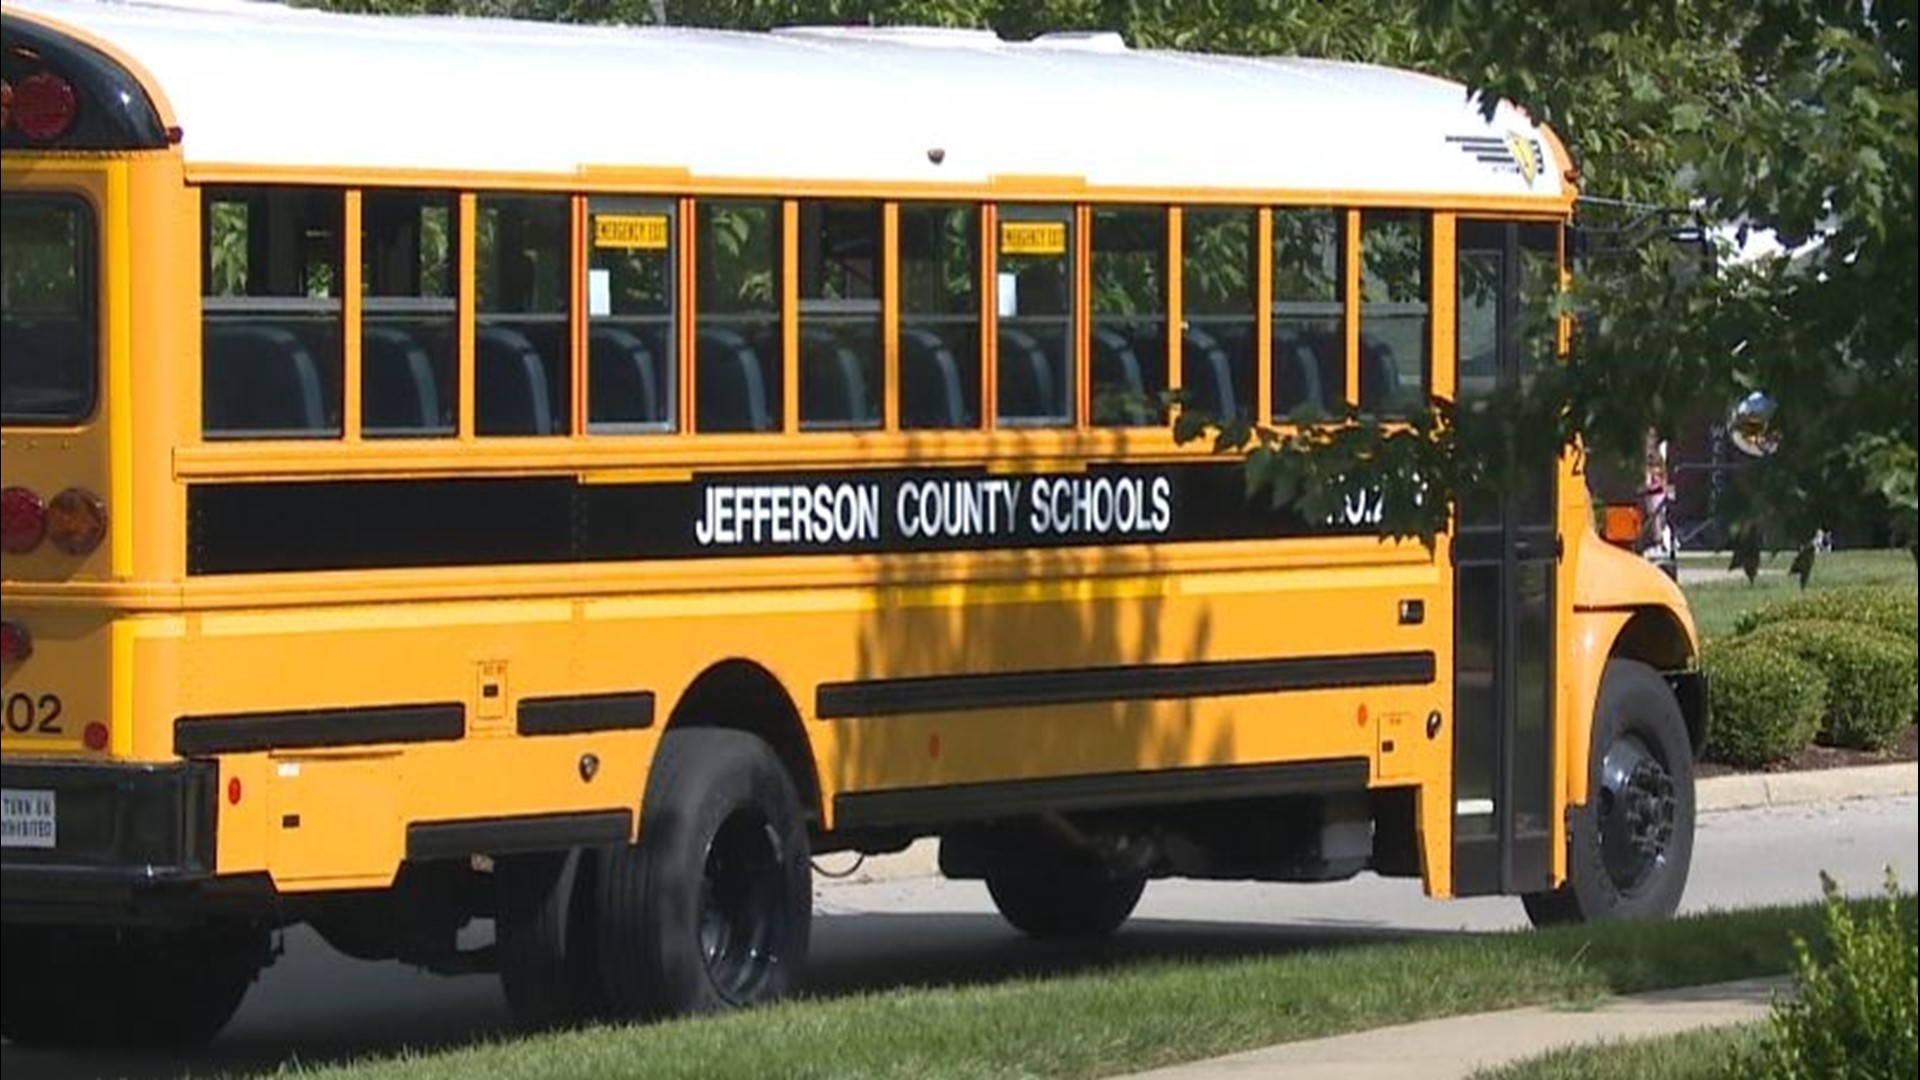 The district announced Saturday that they were hard at work trying to resolve bussing issues after a chaotic start to the year.